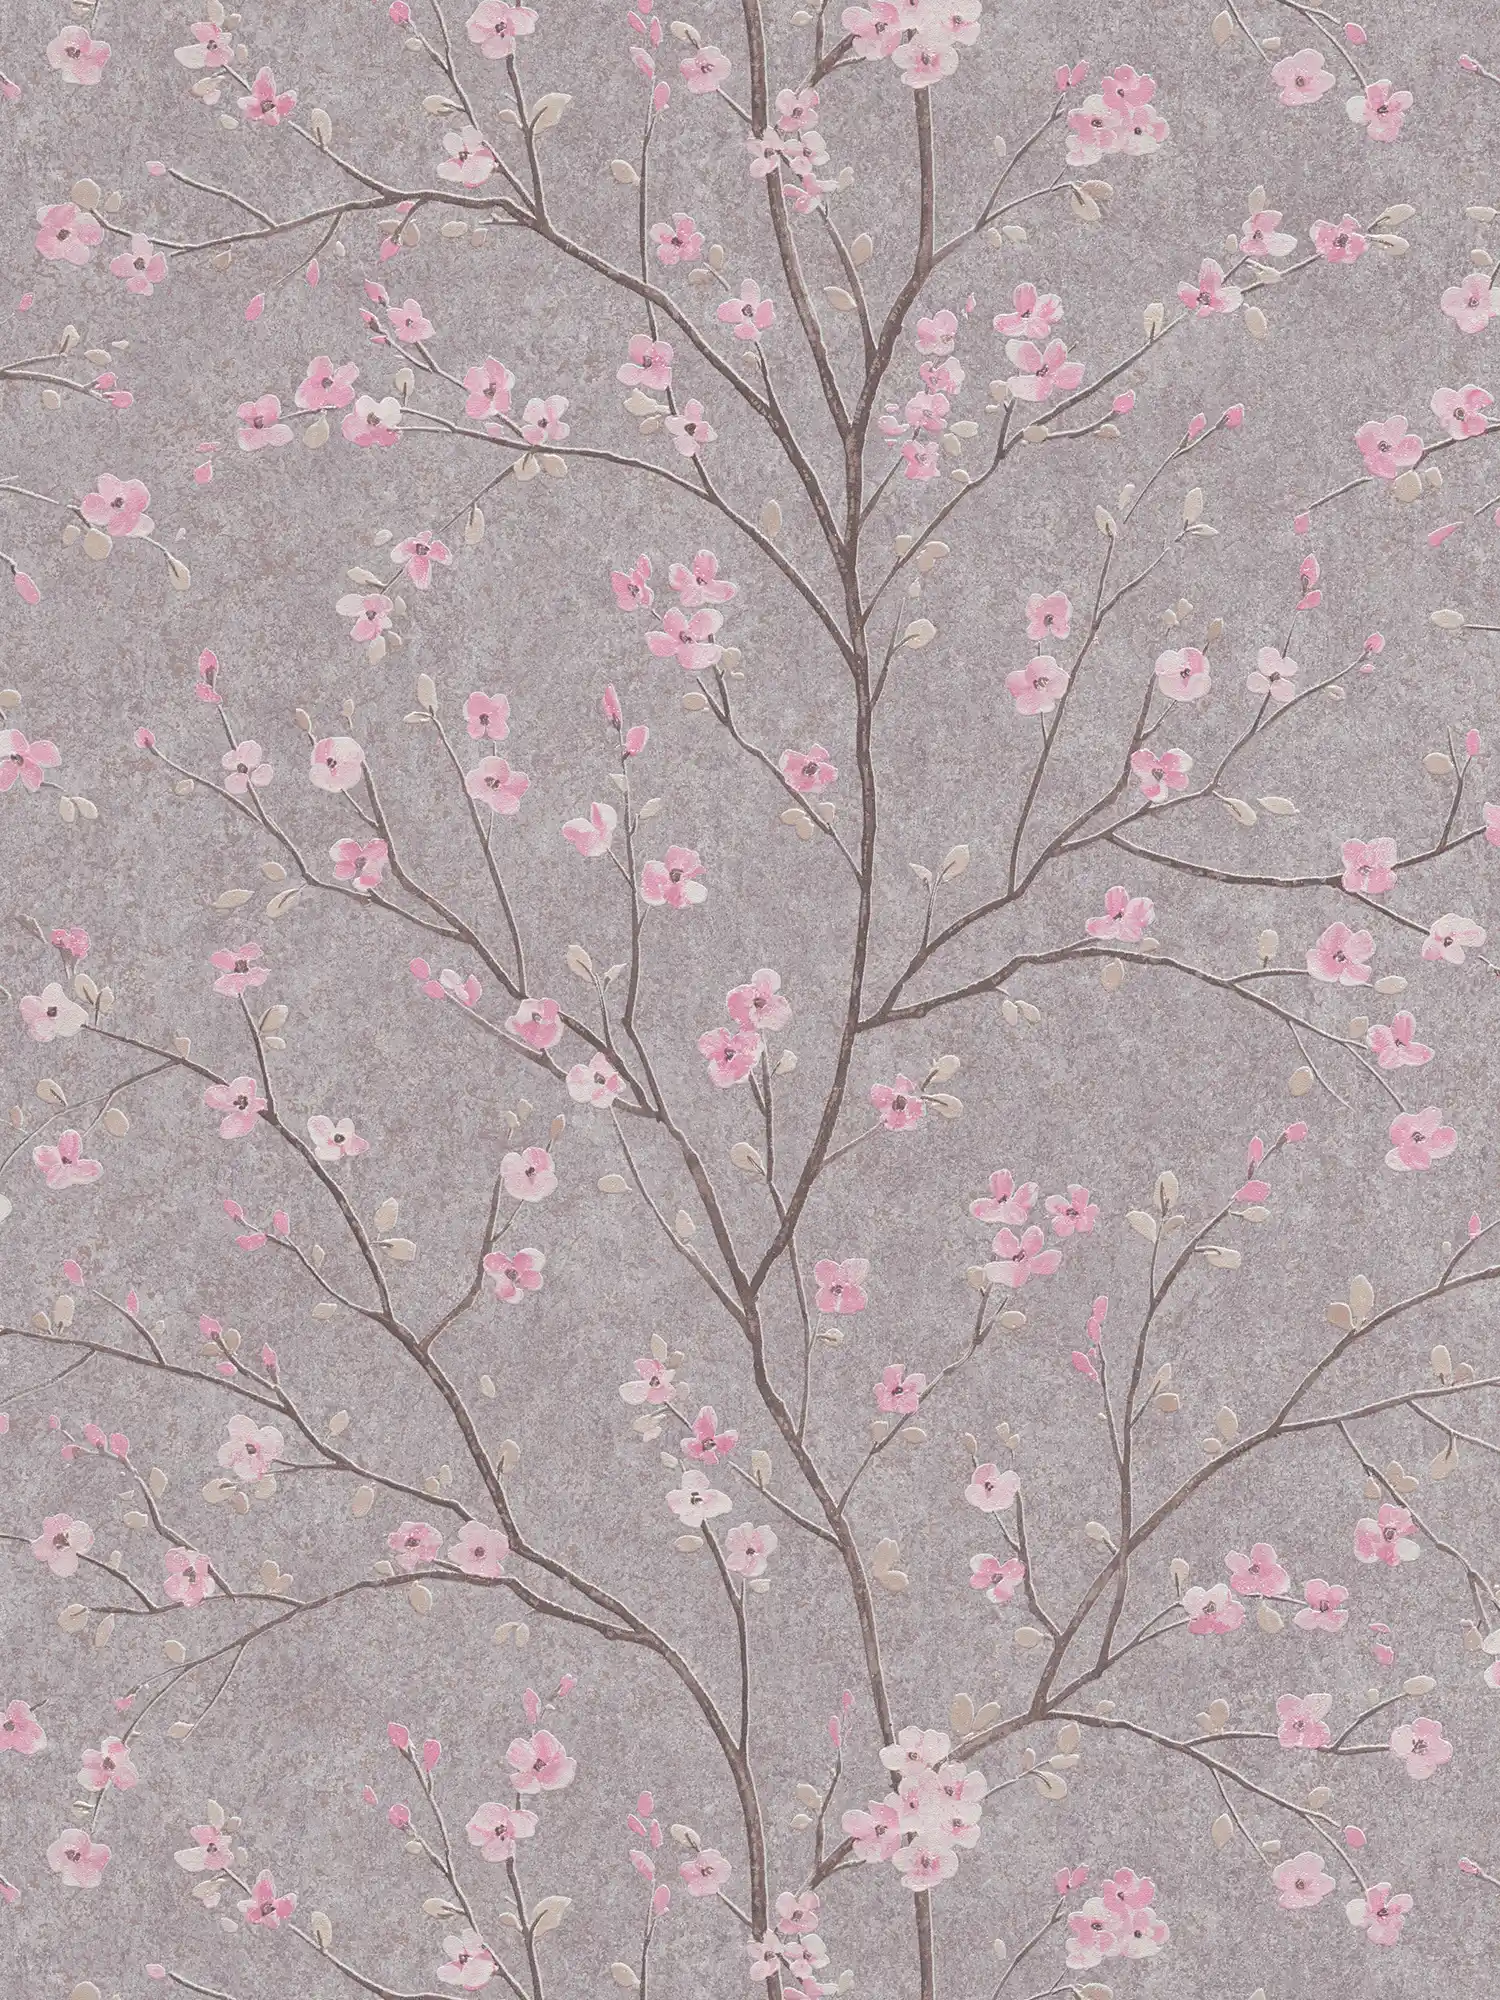 Asian style wallpaper with cherry blossom pattern - grey, pink
